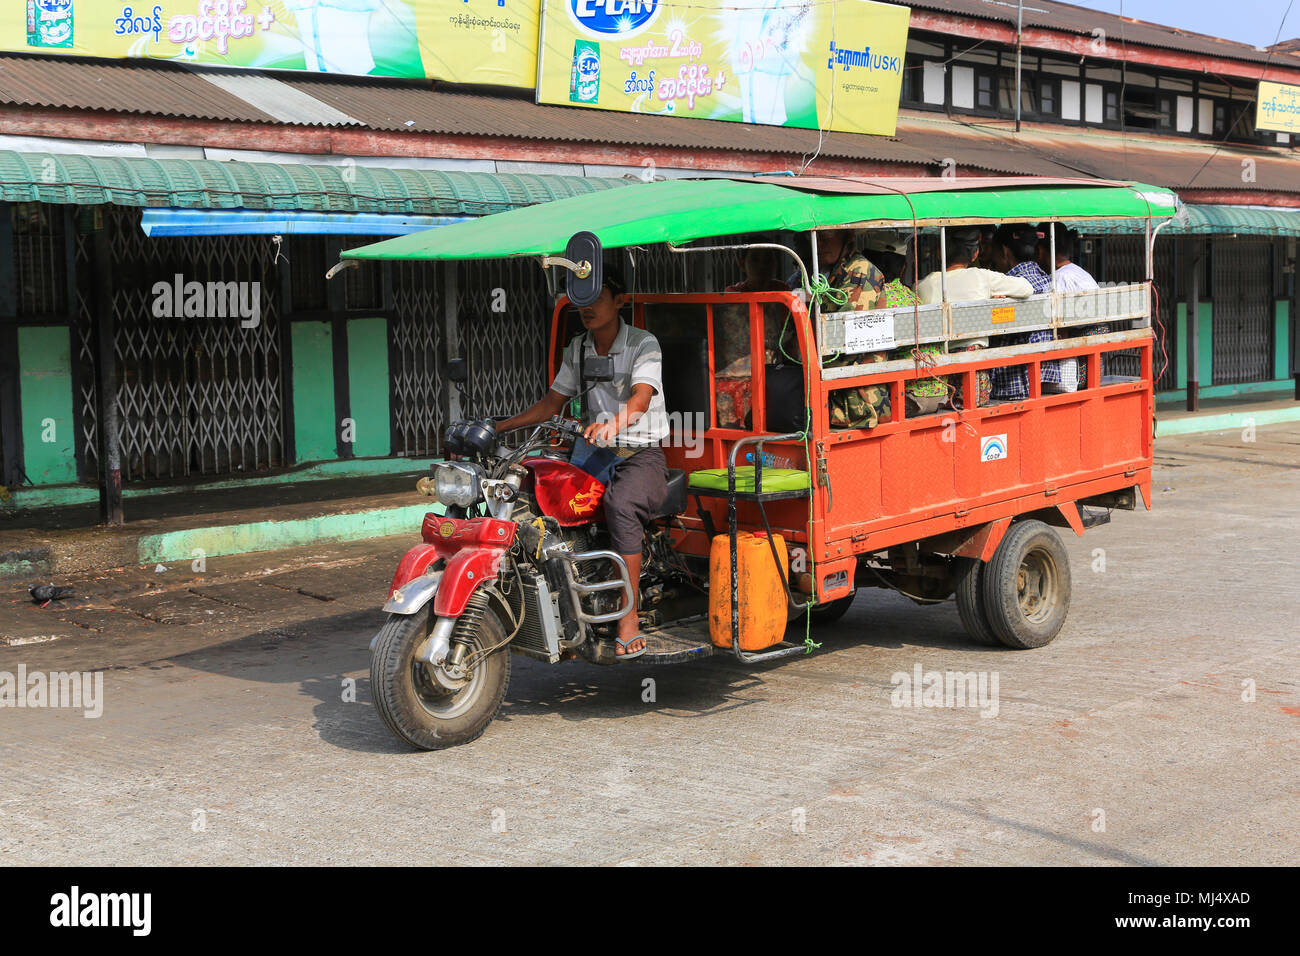 A three wheel truck used as a bus in Maubin located on the Myitmaka River, part of the Irrawaddy Delta in Myanmar (Burma). Stock Photo